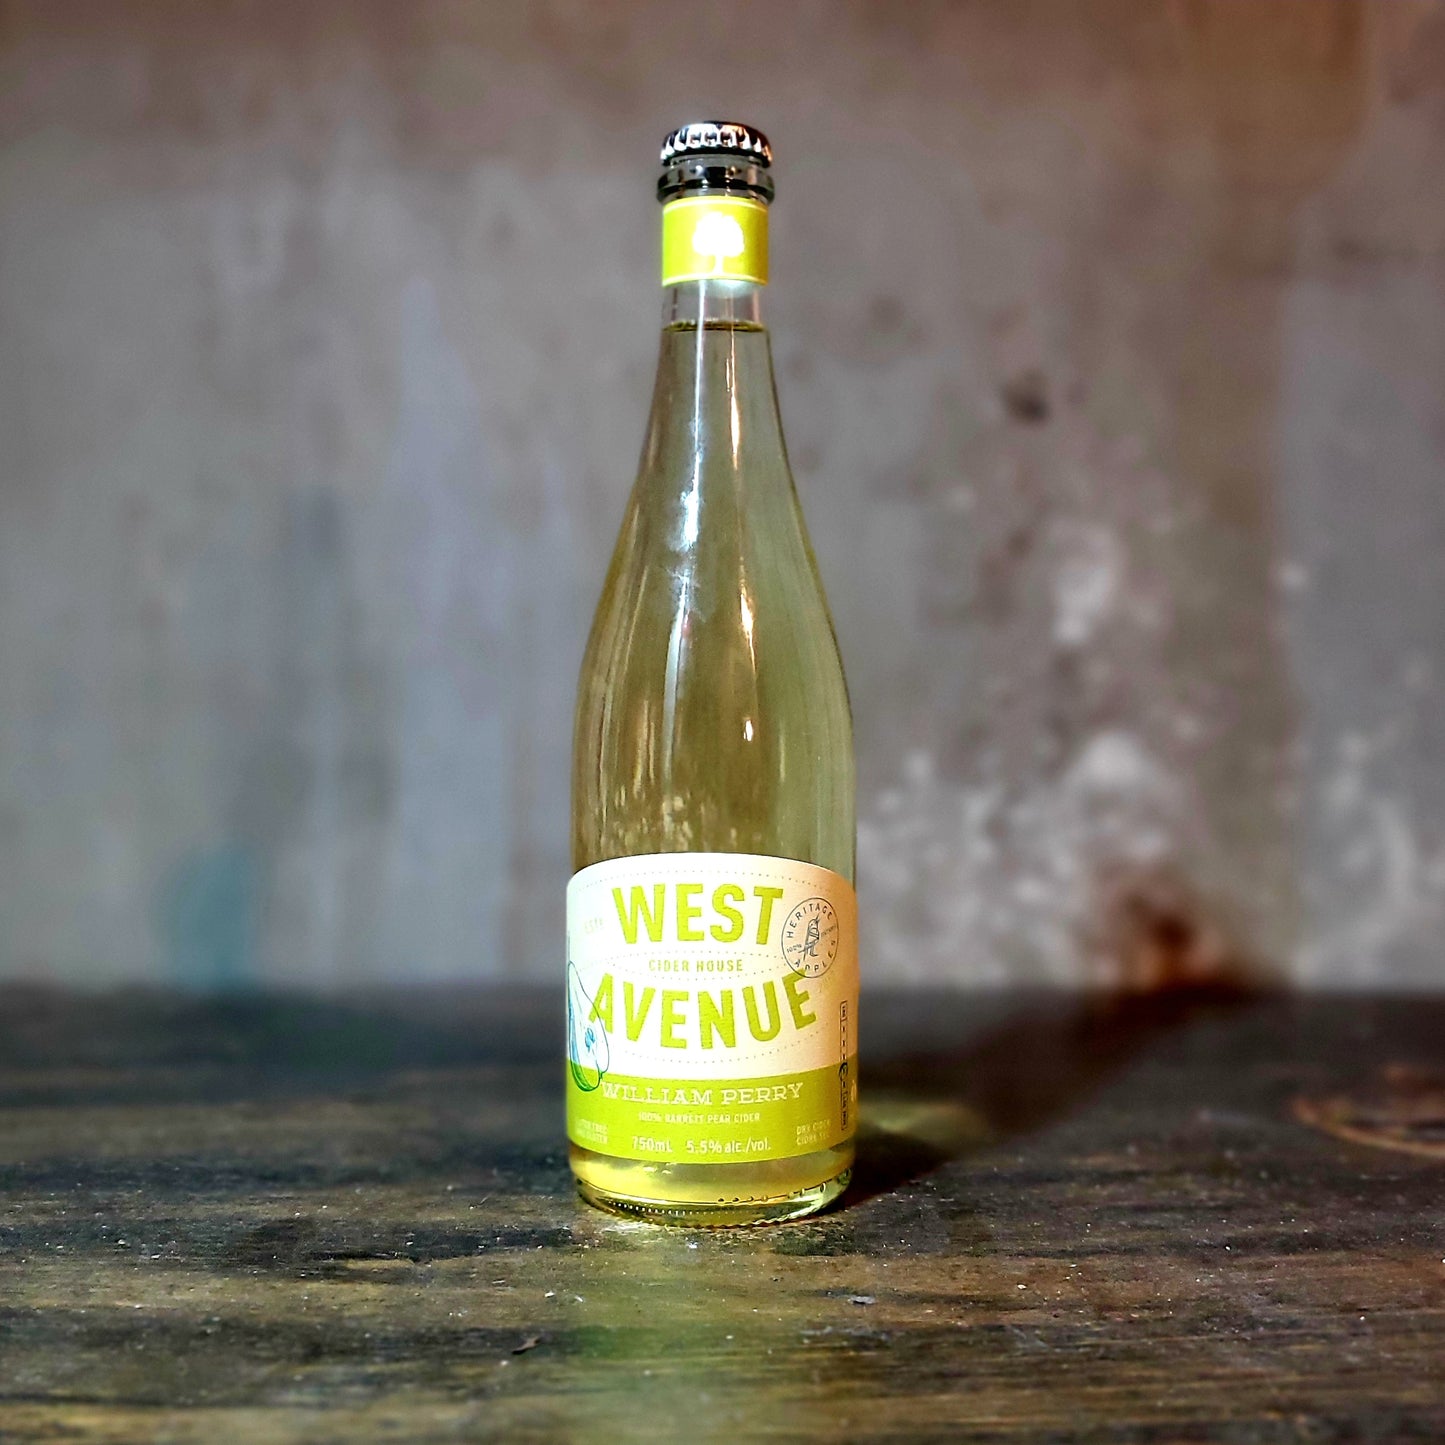 West Avenue "William Perry" Bartlett Pear Cider